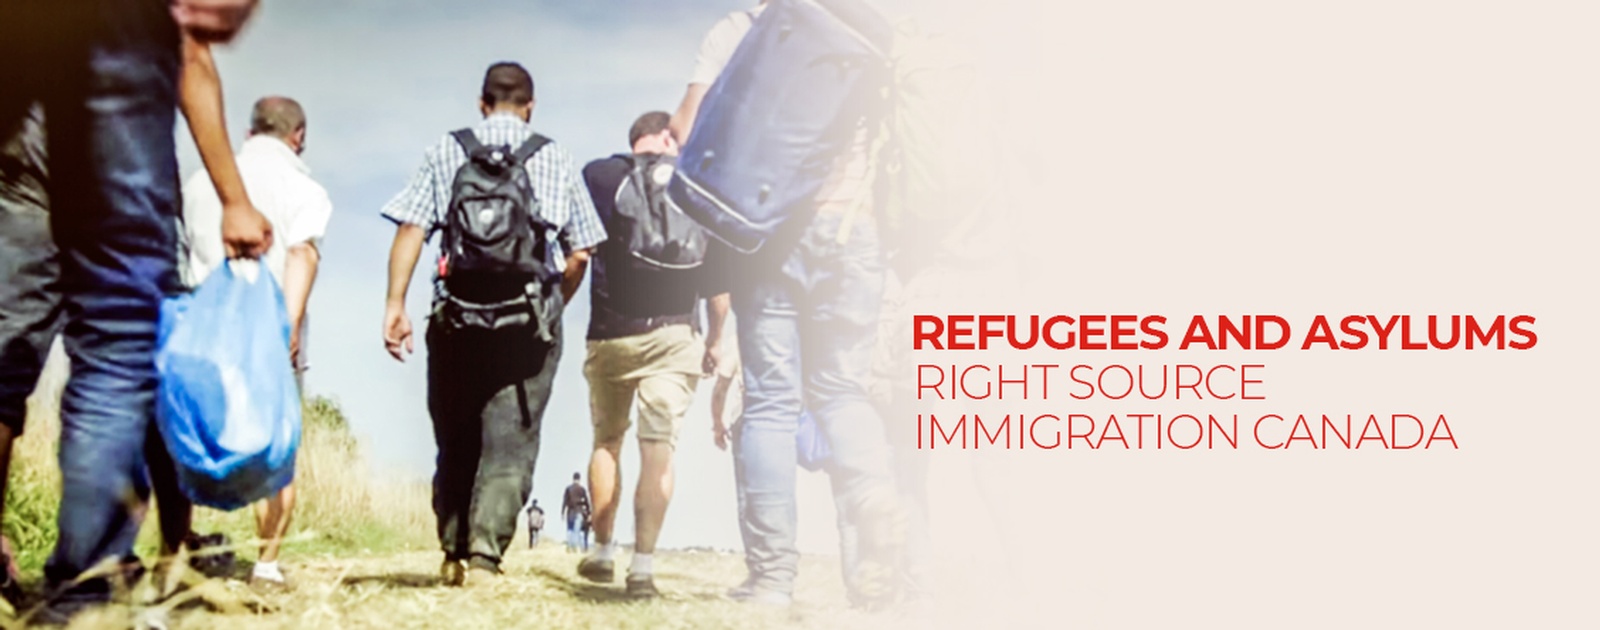 Refugees And Assylums - Right Source Immigration Canada